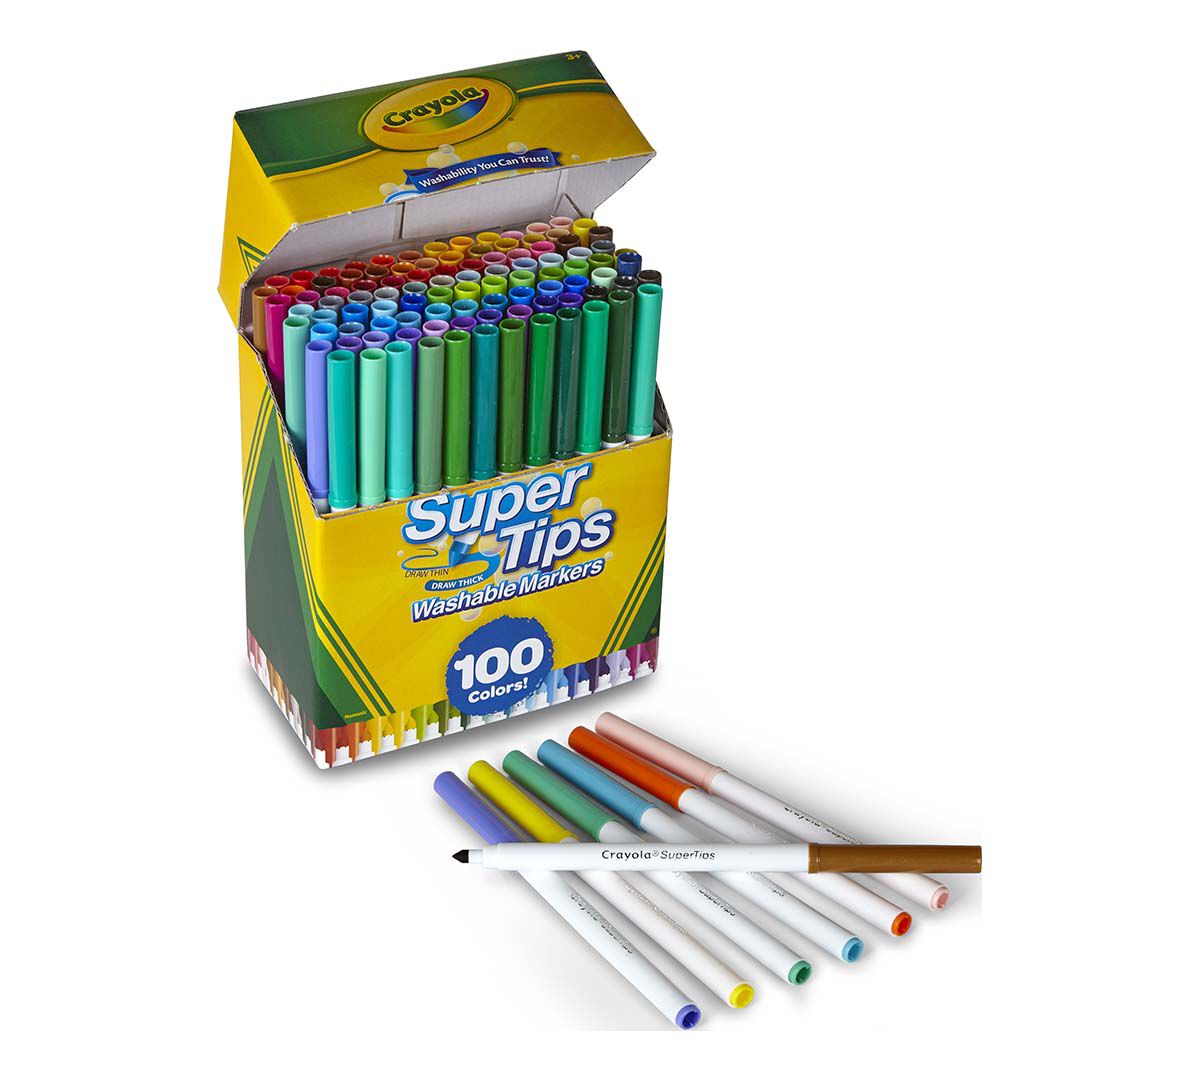 Crayola Crayons Markers,Supertips,Chalk,Coloring Pencils Childrens Art drawing 